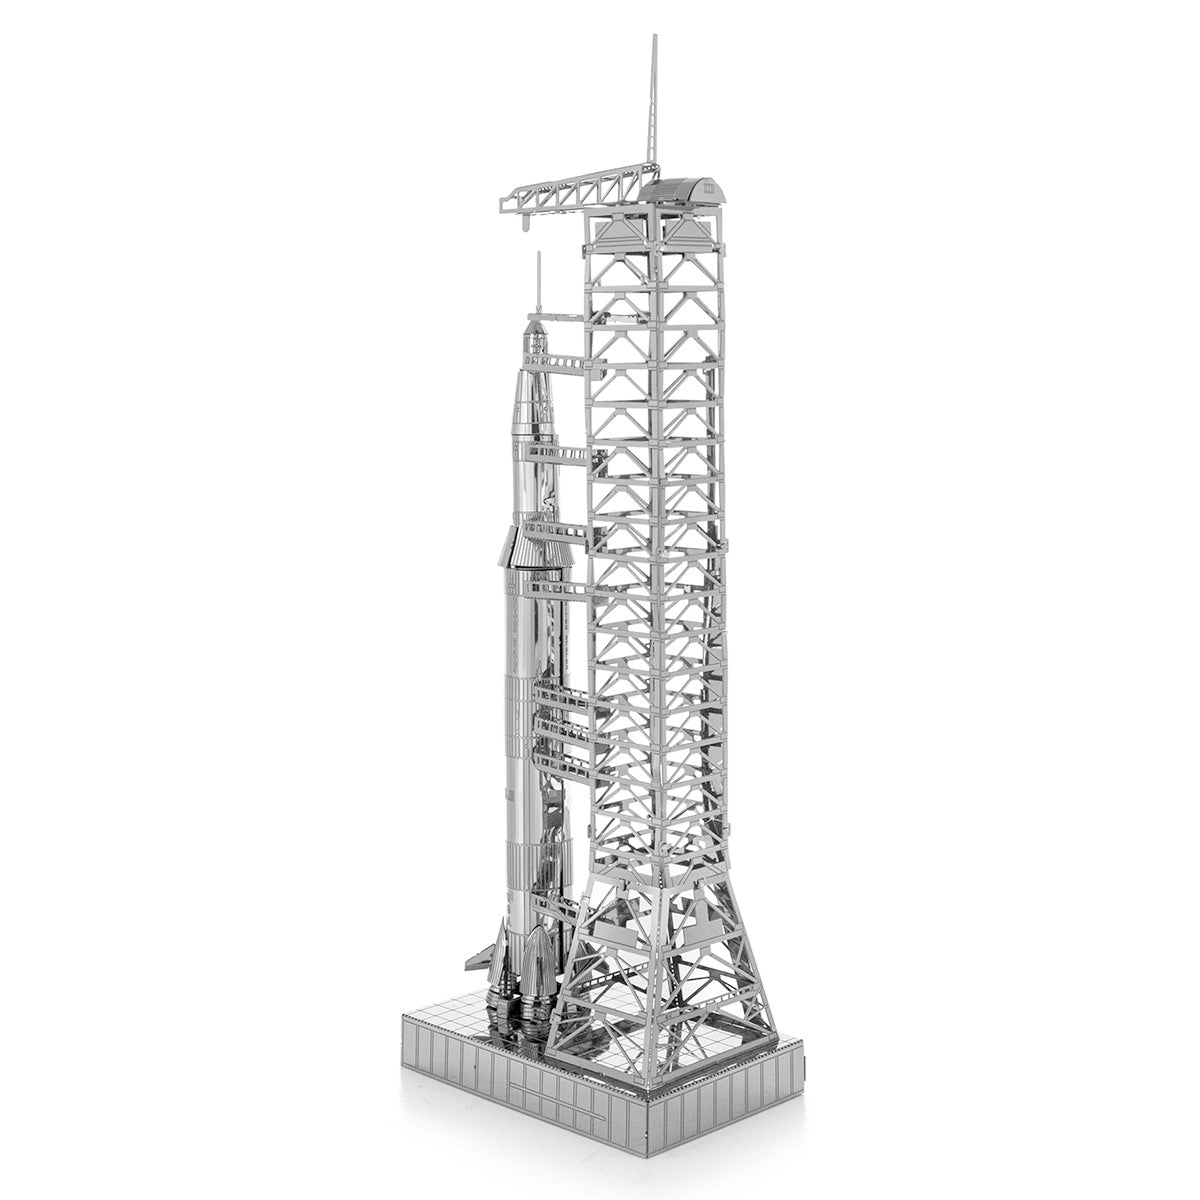 Apollo Saturn V wth Gantry 3D Model Kit - Metal Earth gift puzzle puzzle